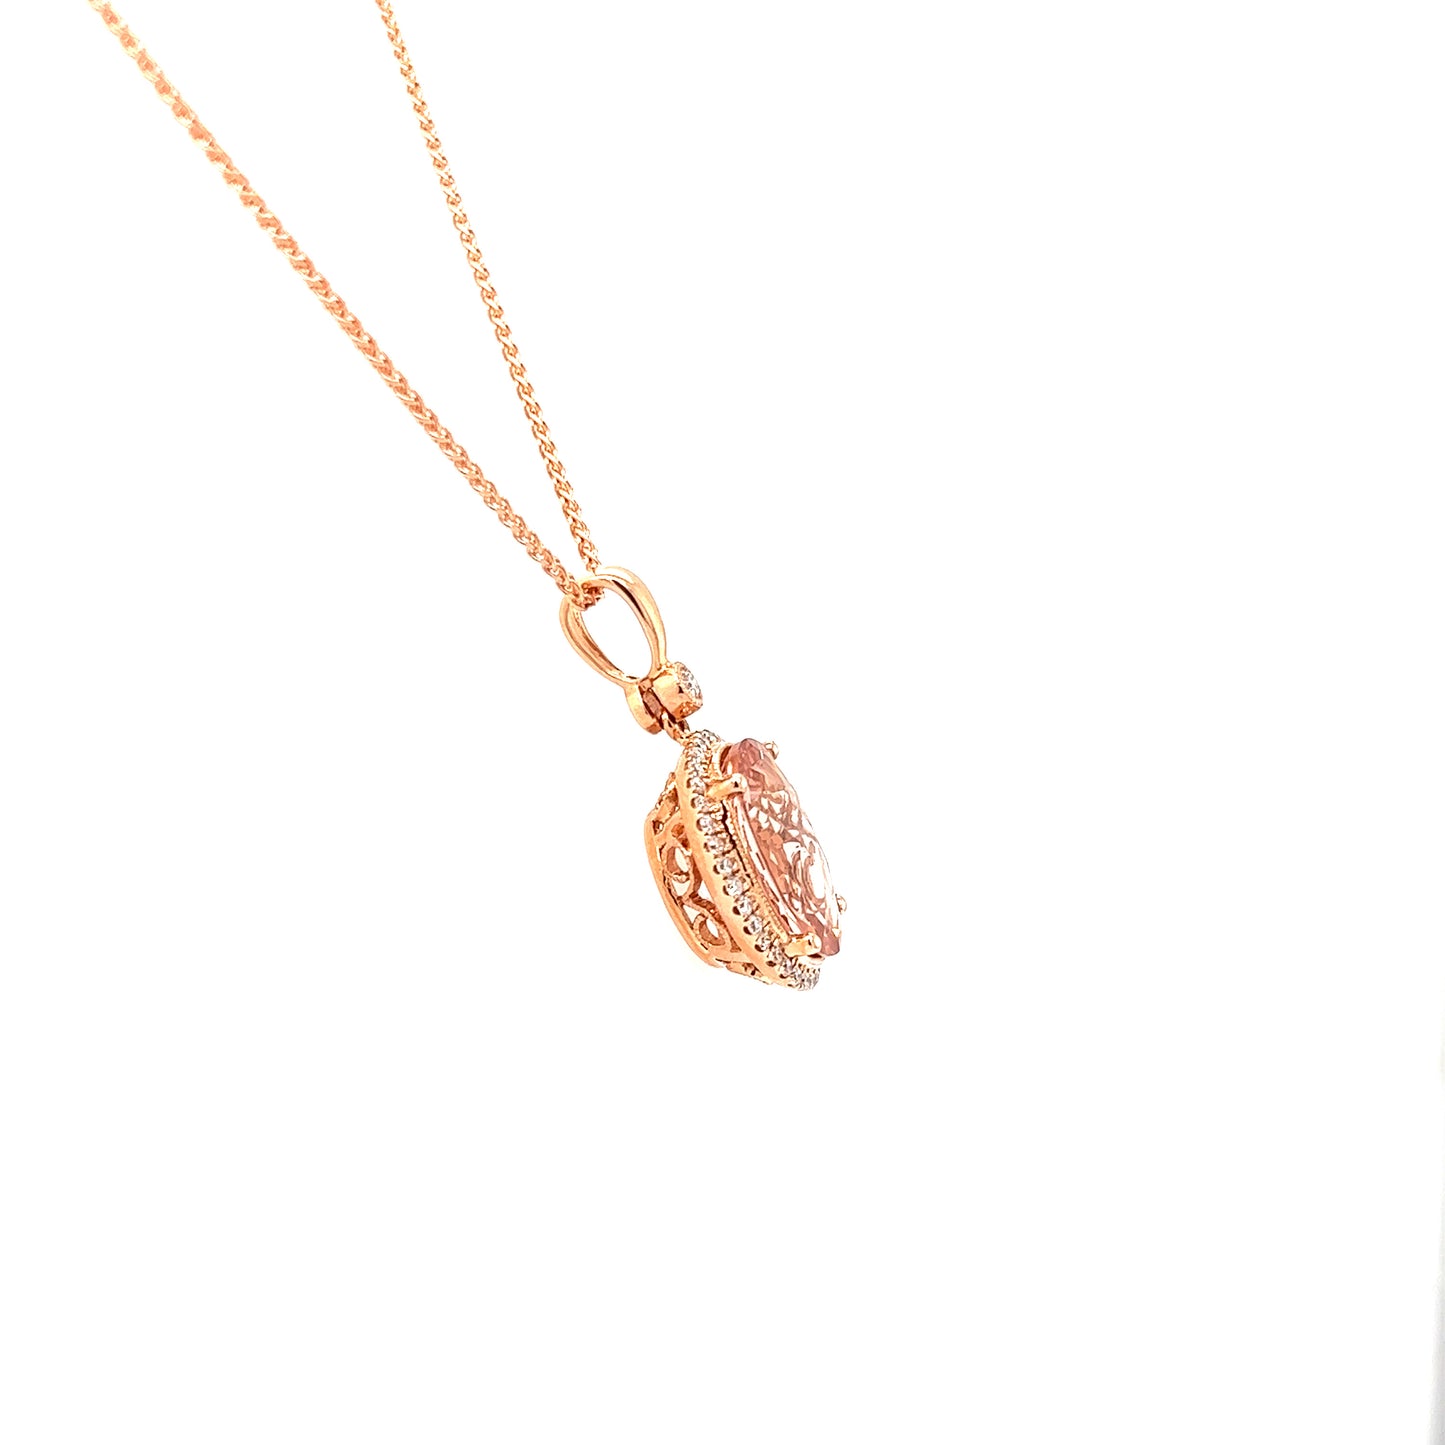 Oval Morganite Necklace with Diamond Halo in 14K Rose Gold Right Profile View